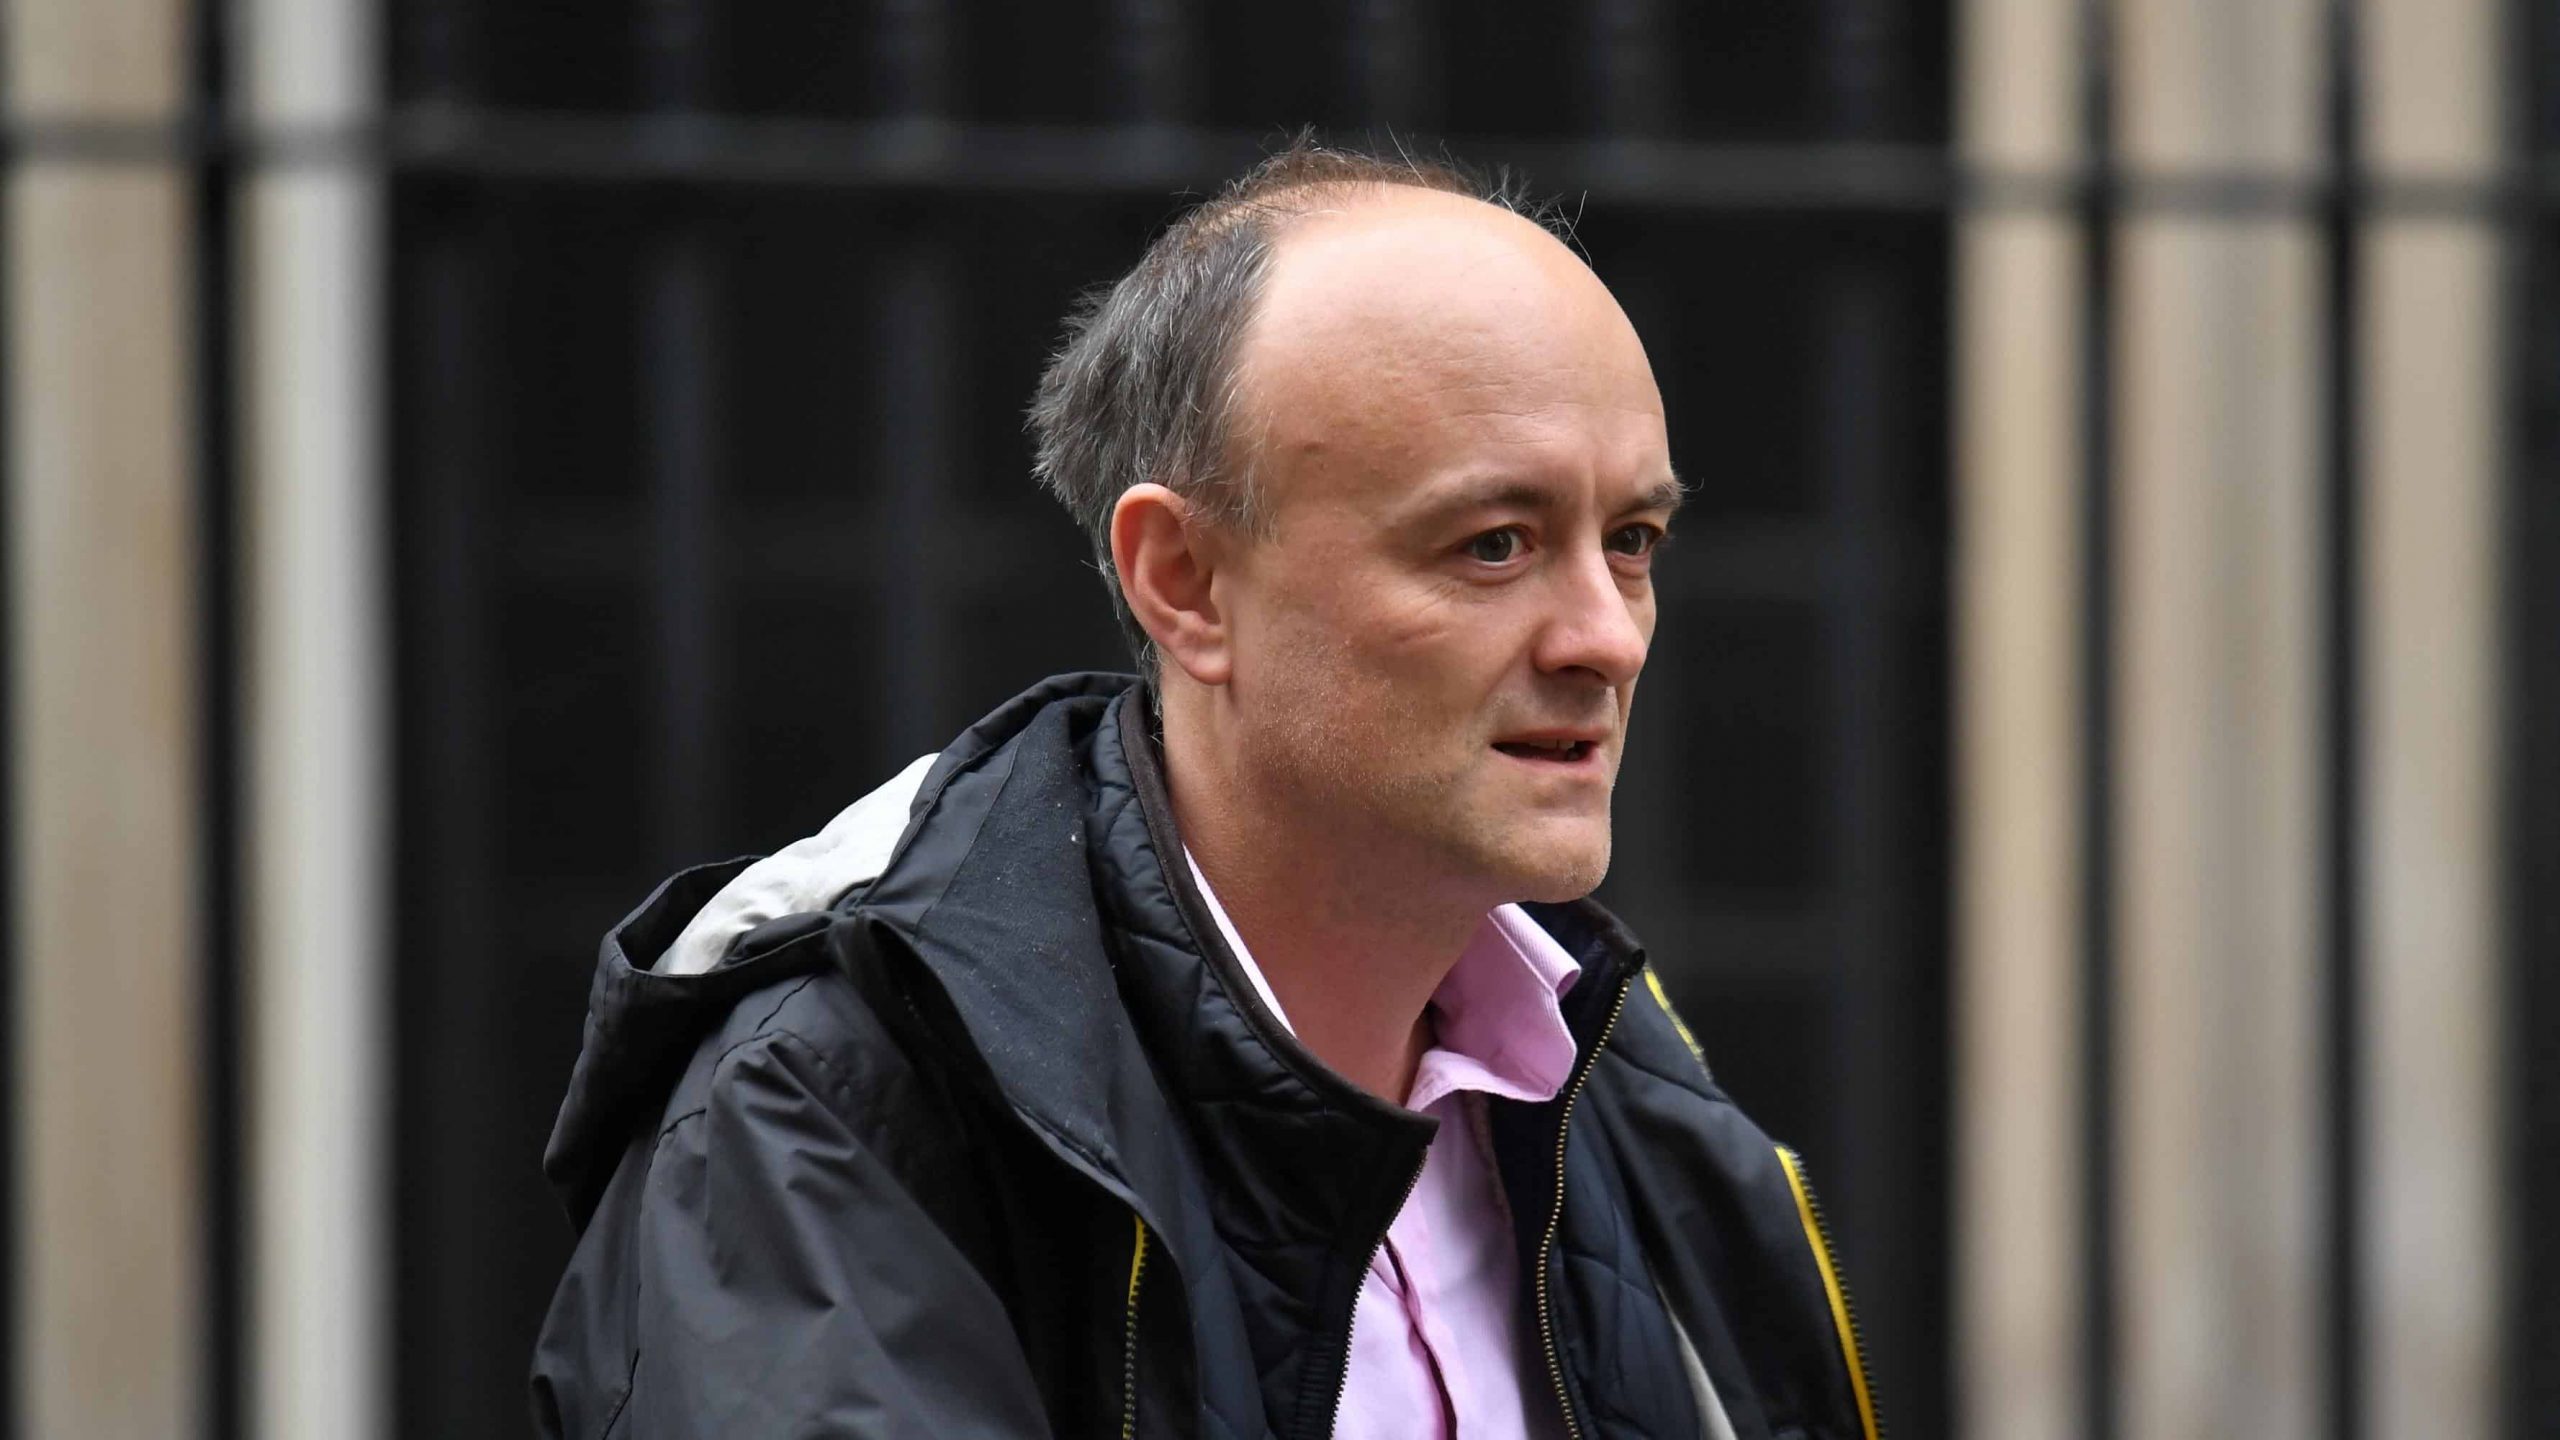 PM’s chief aide Dominic Cummings paid three times average UK salary